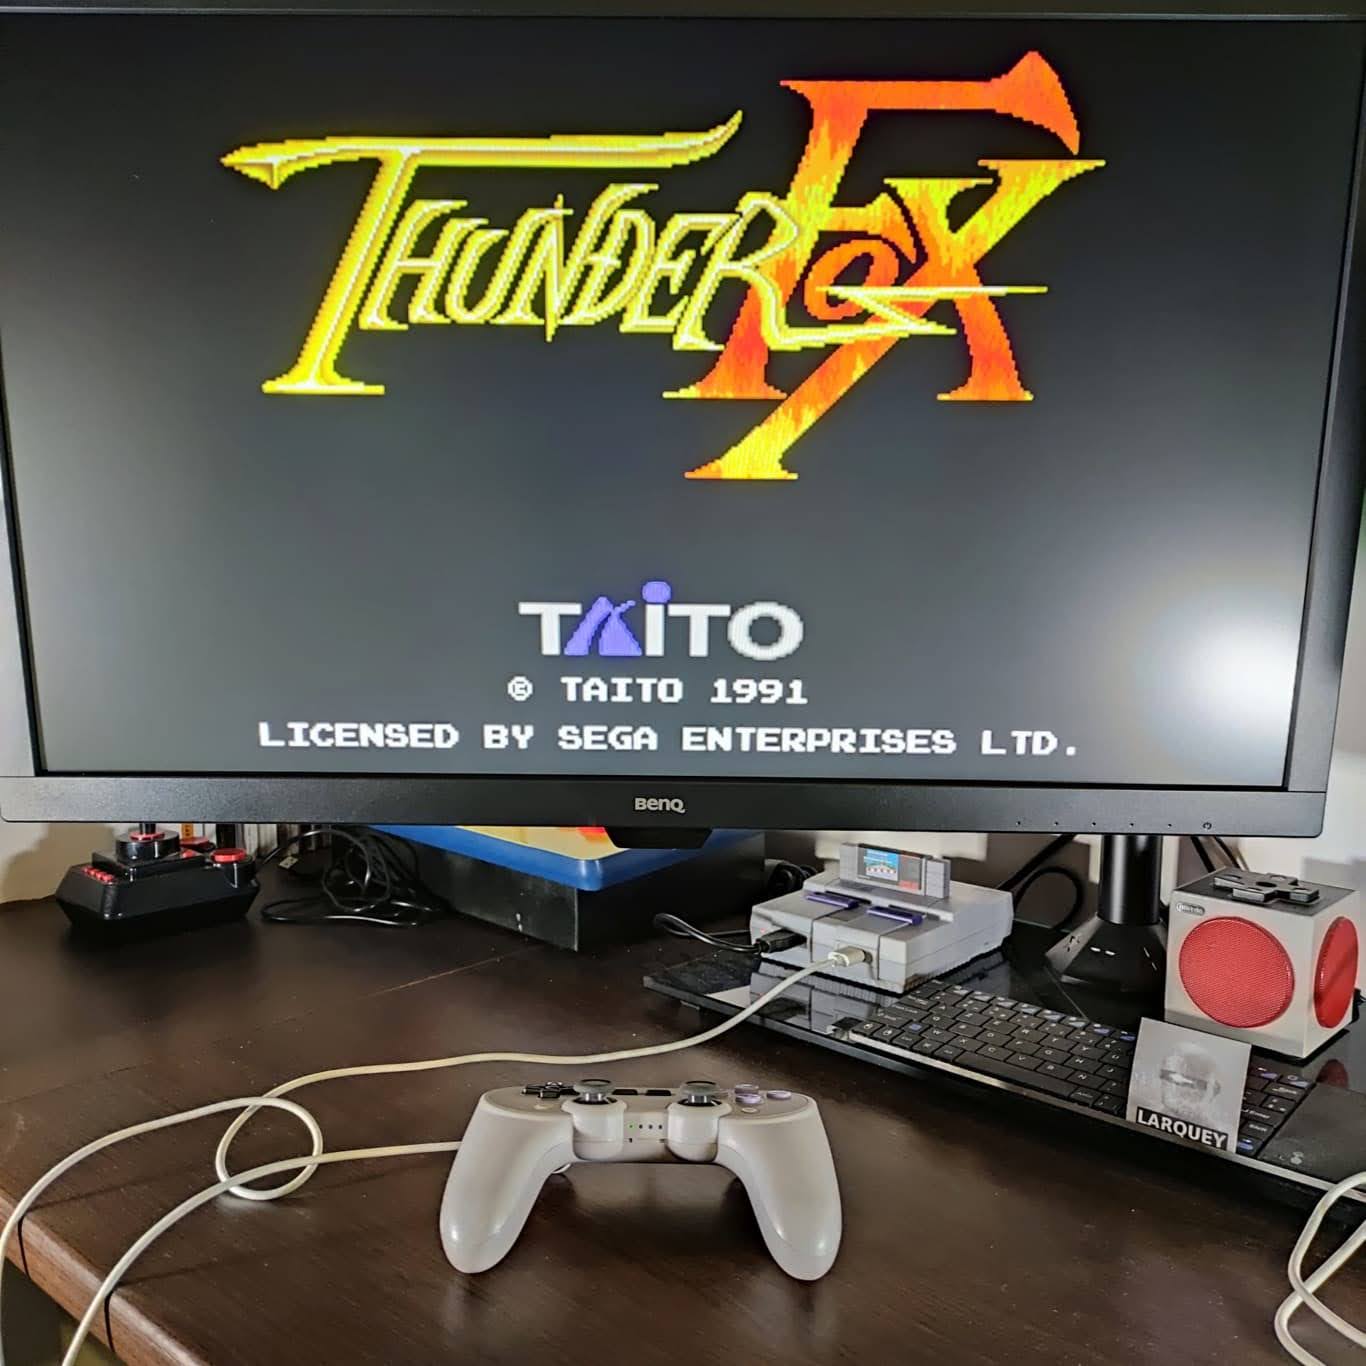 Larquey: Thunder Fox[time select:normal/level select: normal] (Sega Genesis / MegaDrive Emulated) 19,500 points on 2022-12-11 02:49:28